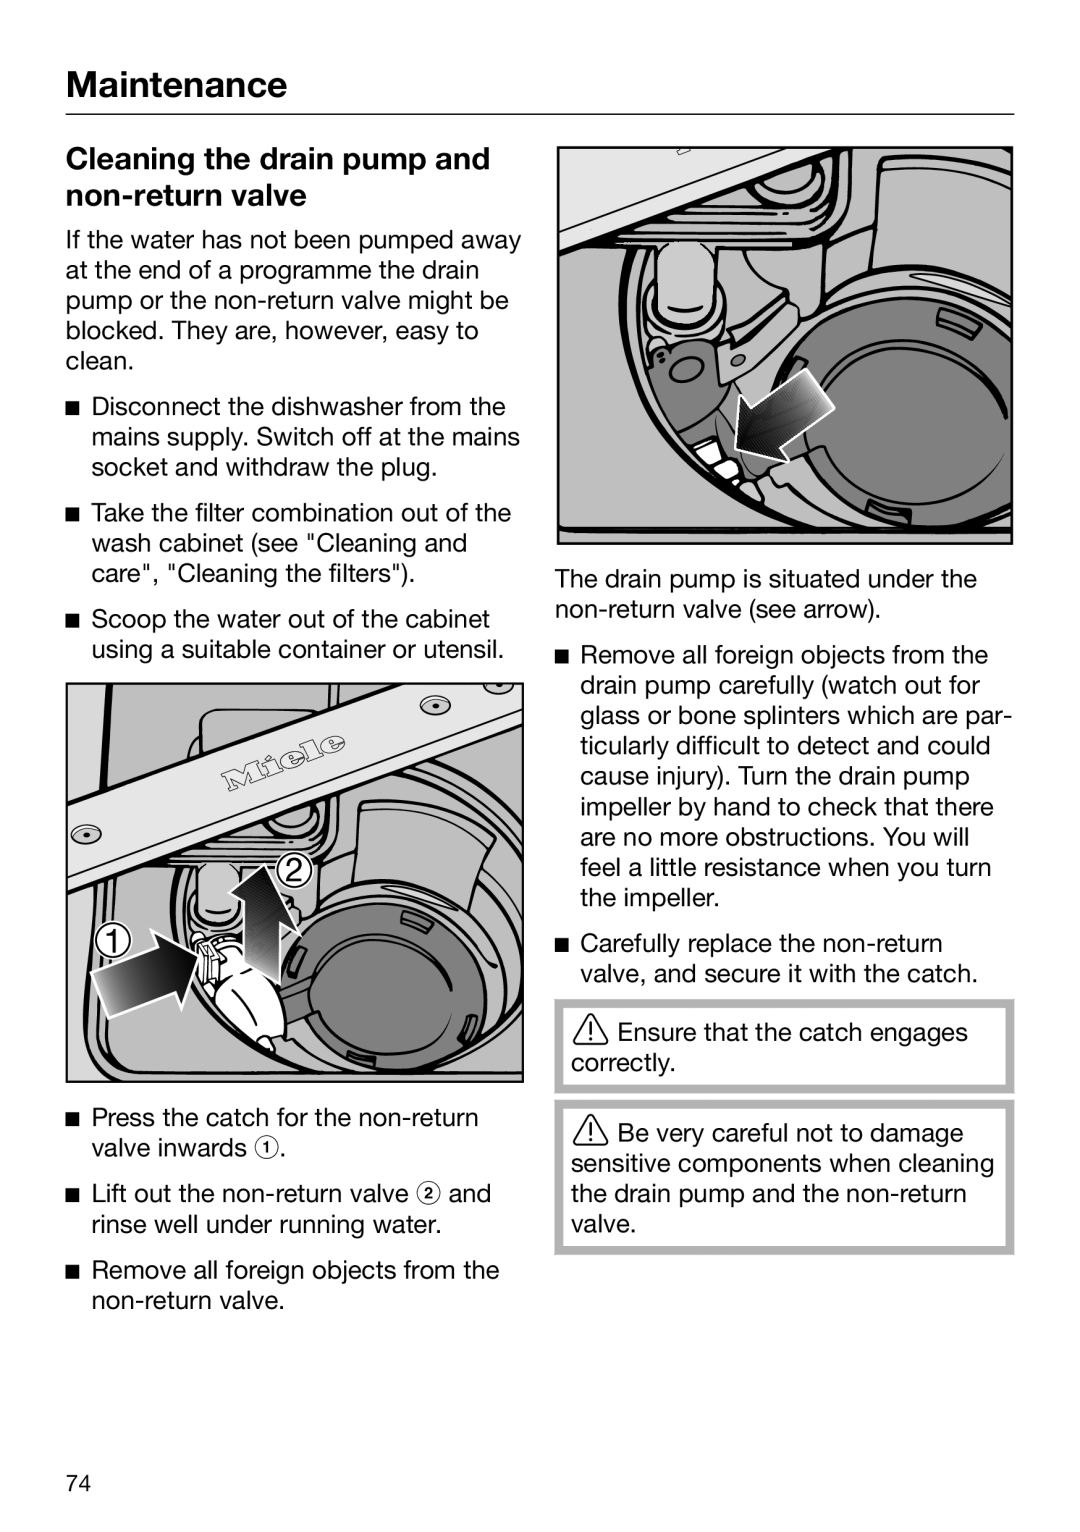 Miele 09 645 470 manual Cleaning the drain pump and non-return valve, Maintenance 